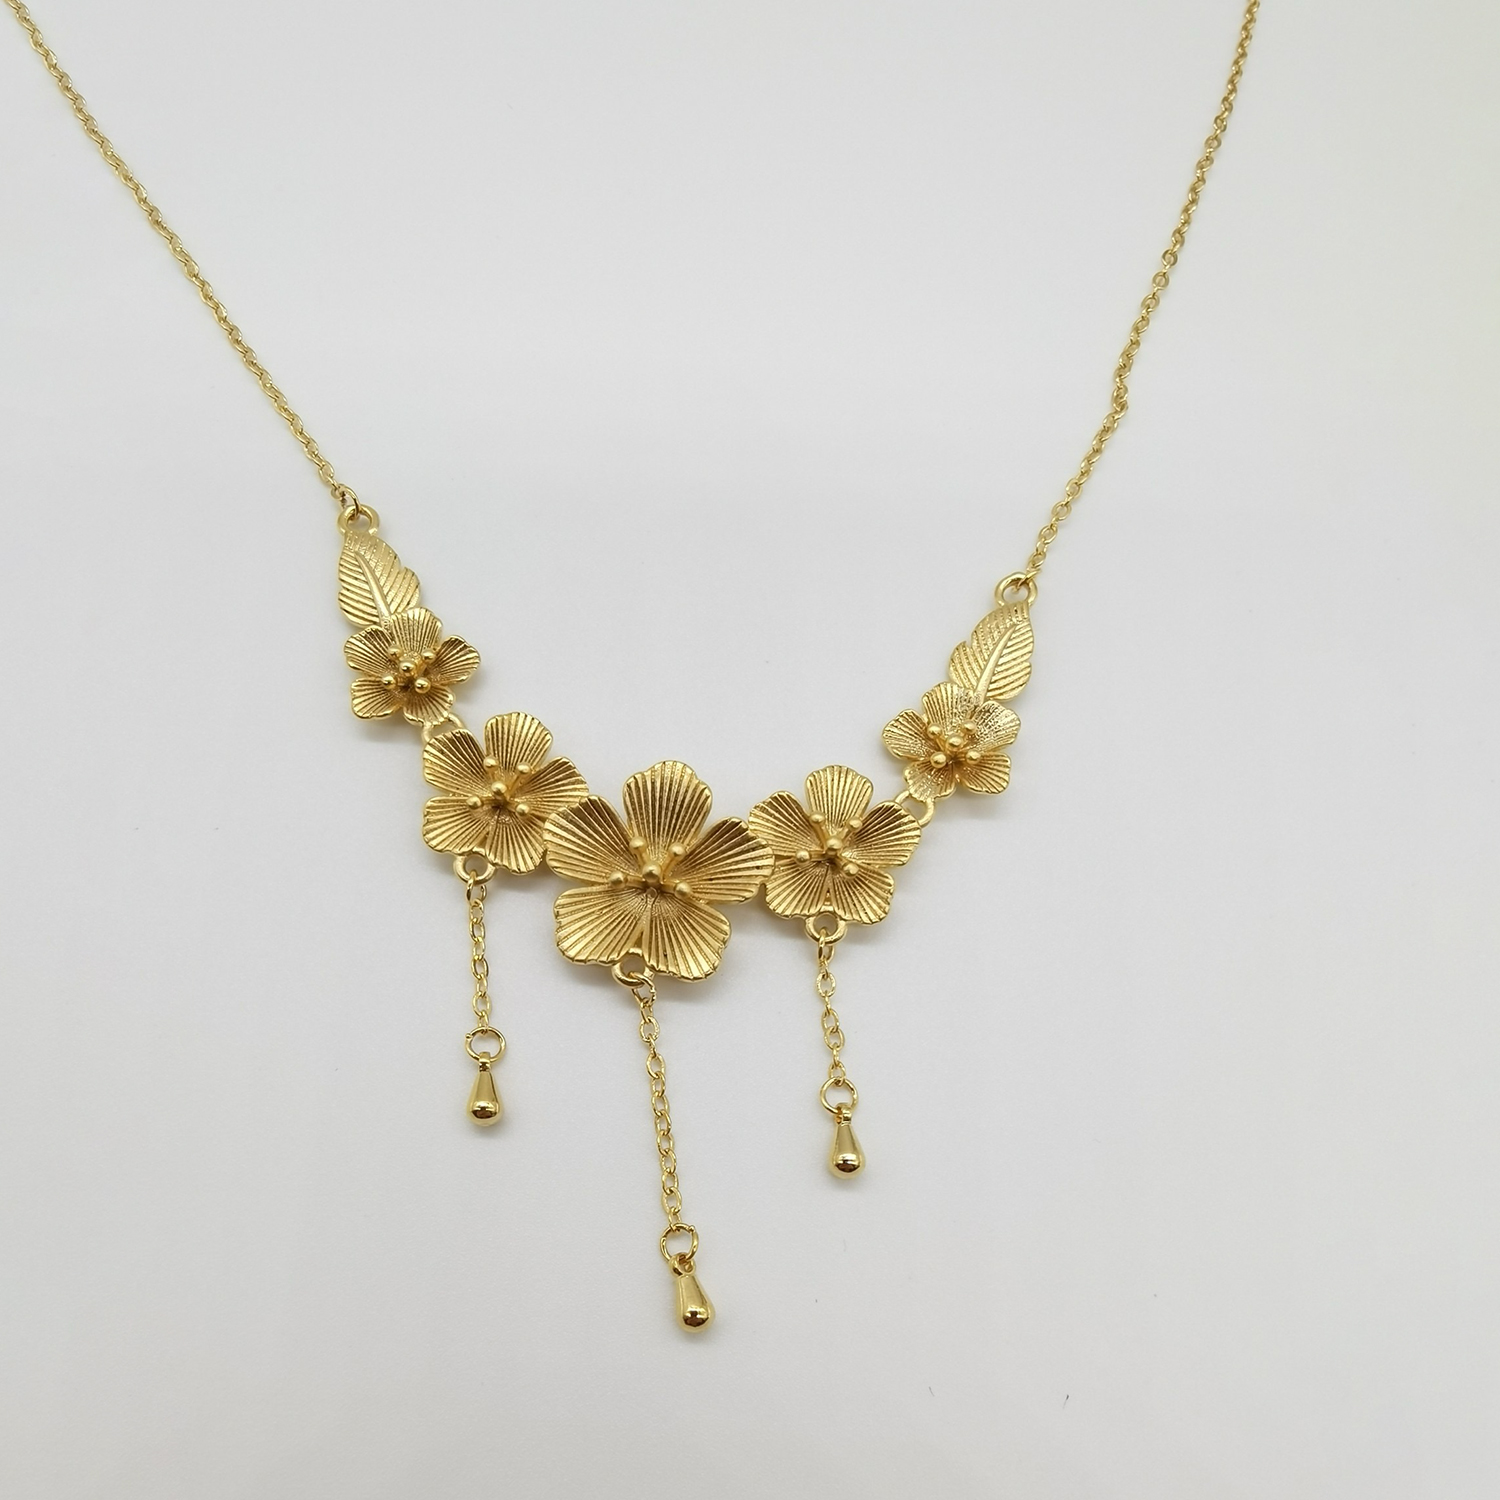 Alluvial gold vacuum electroplating 24K gold flowery tassel necklace